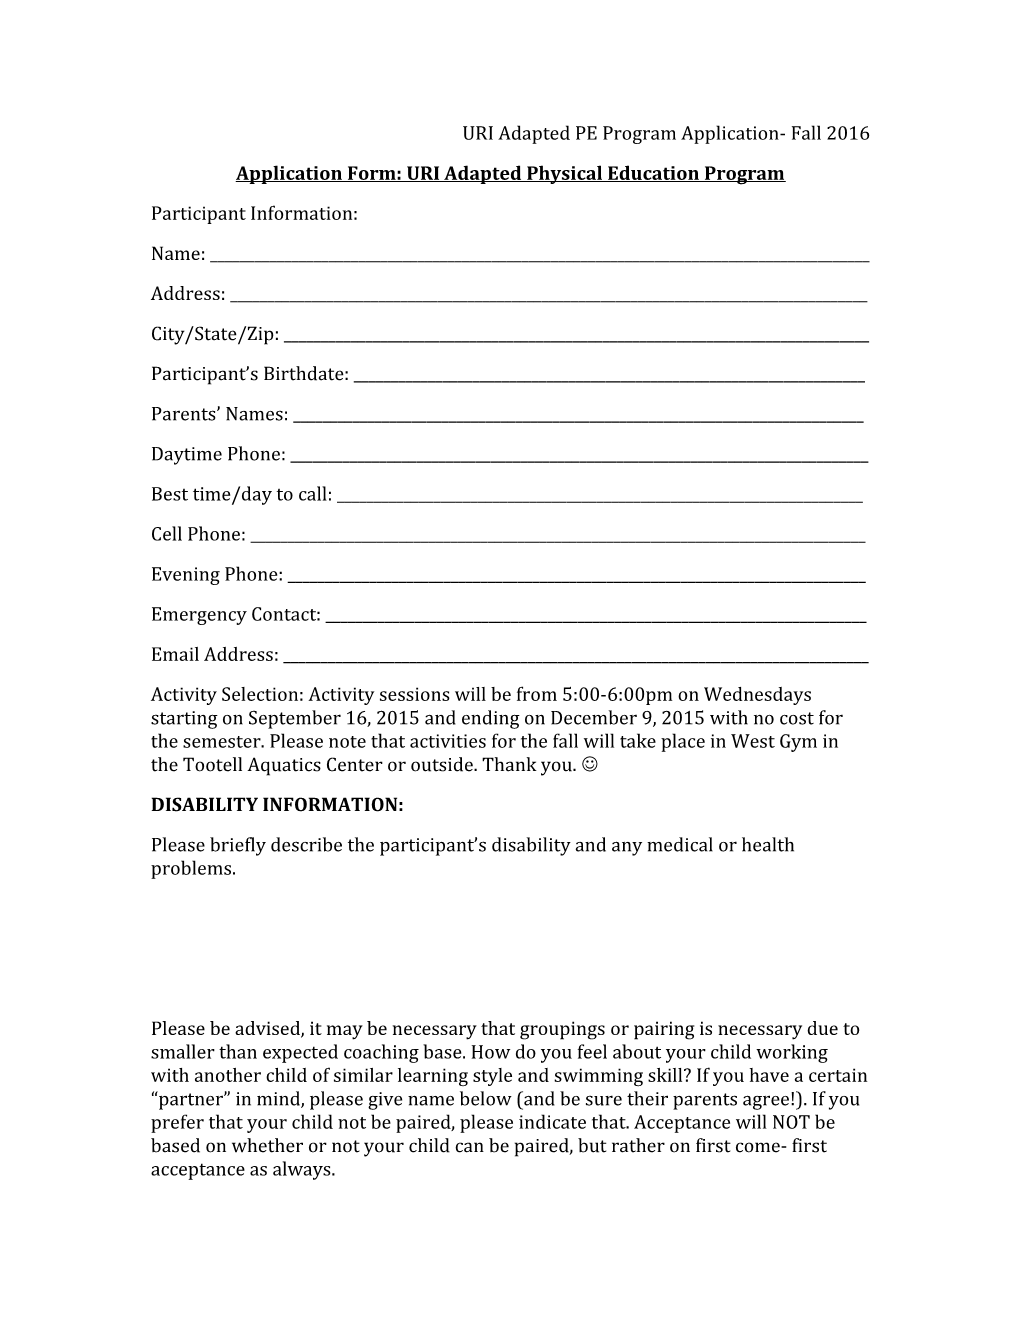 Application Form: URI Adapted Physical Education Program